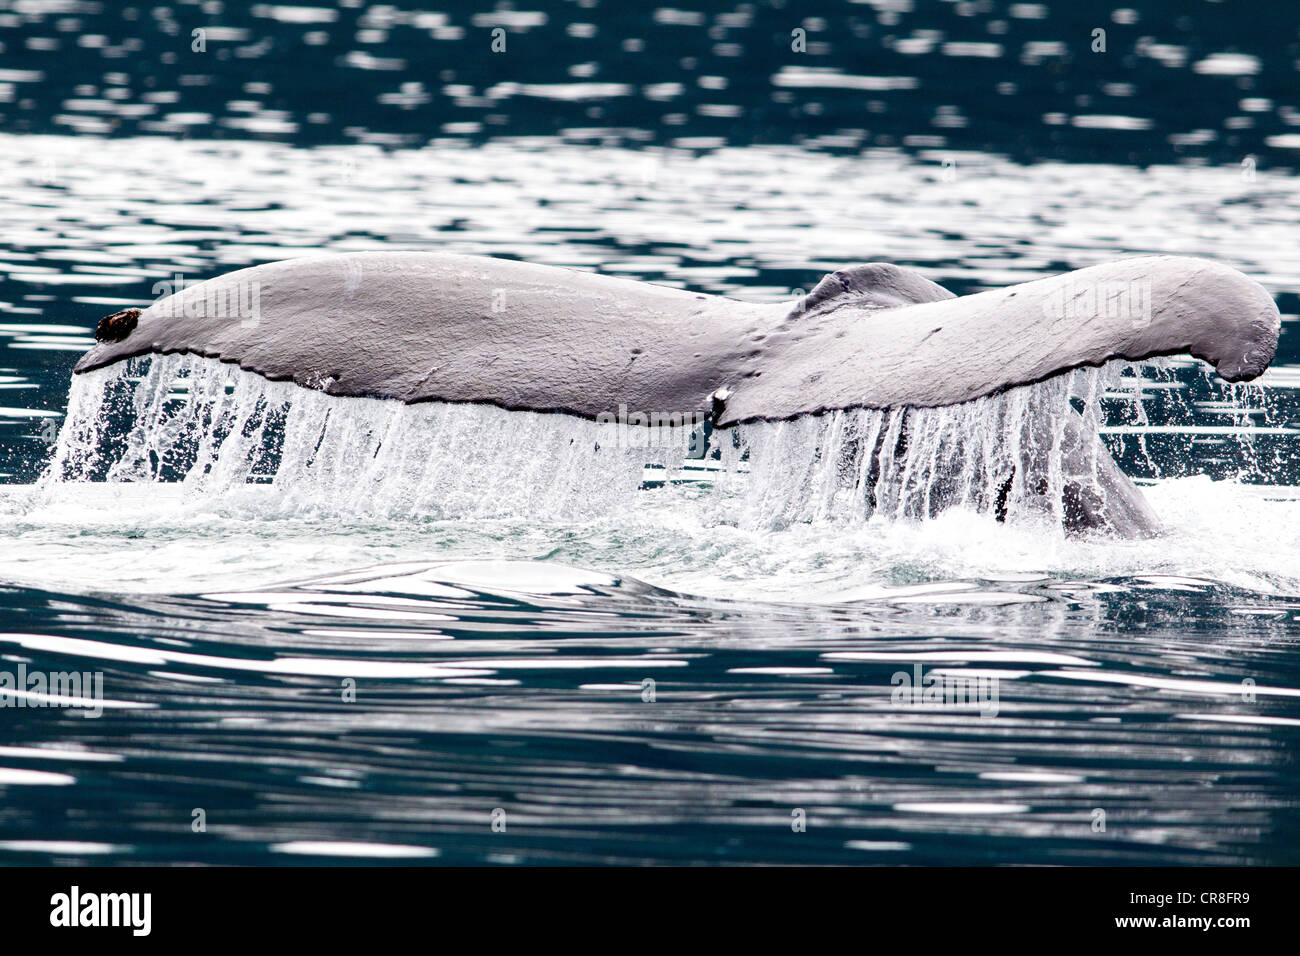 Tail of Humpback Whale Stock Photo